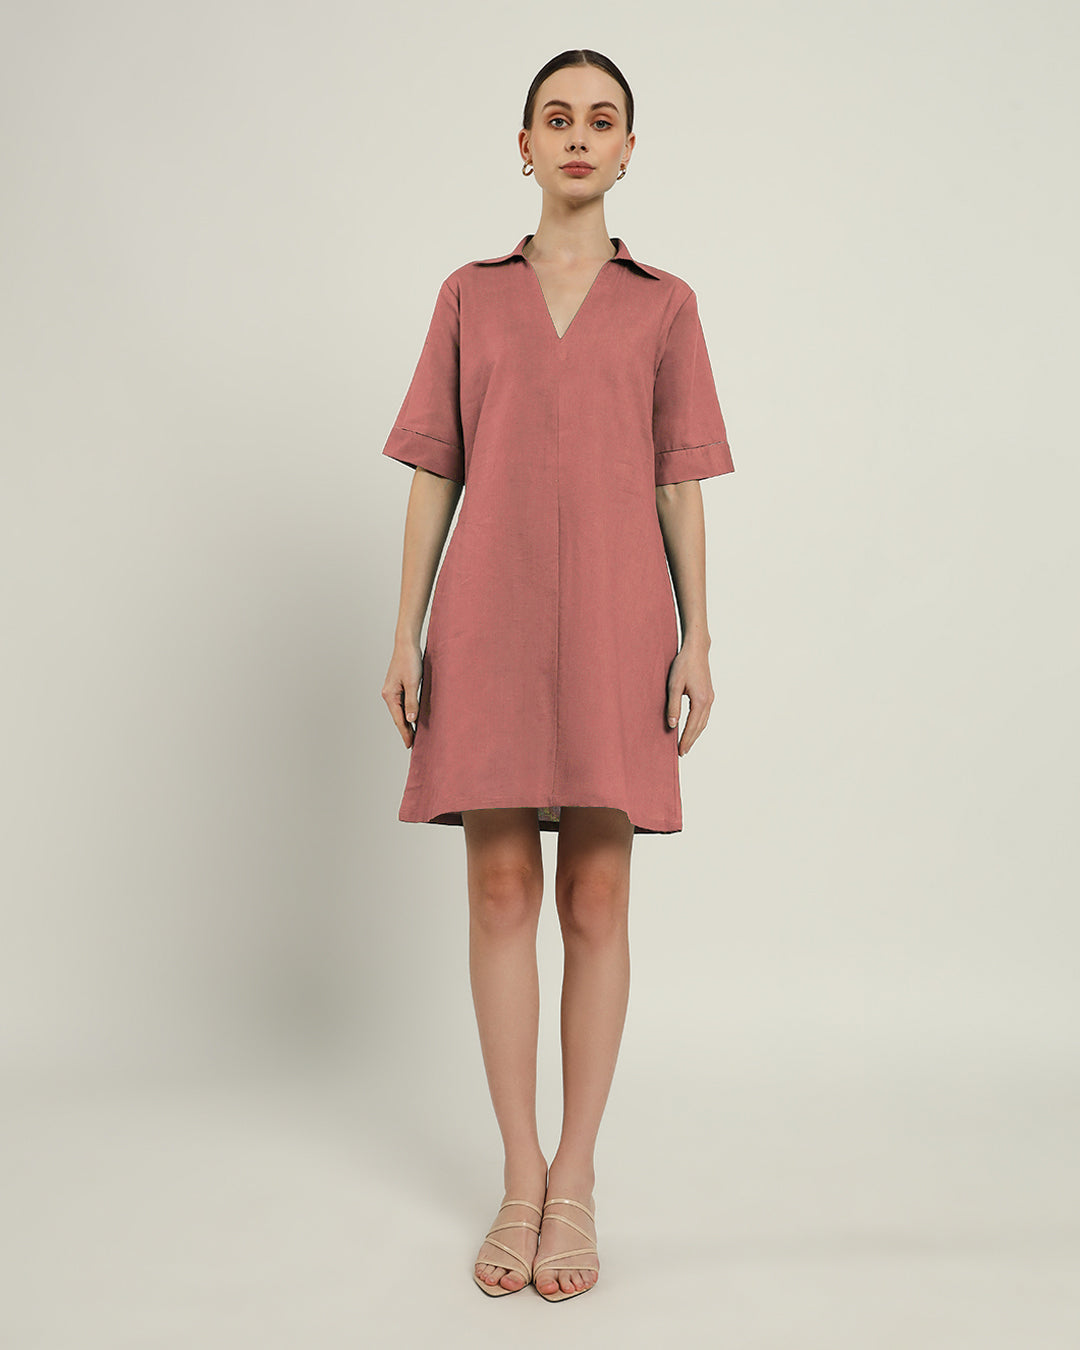 The Ermont Ivory Pink Dress